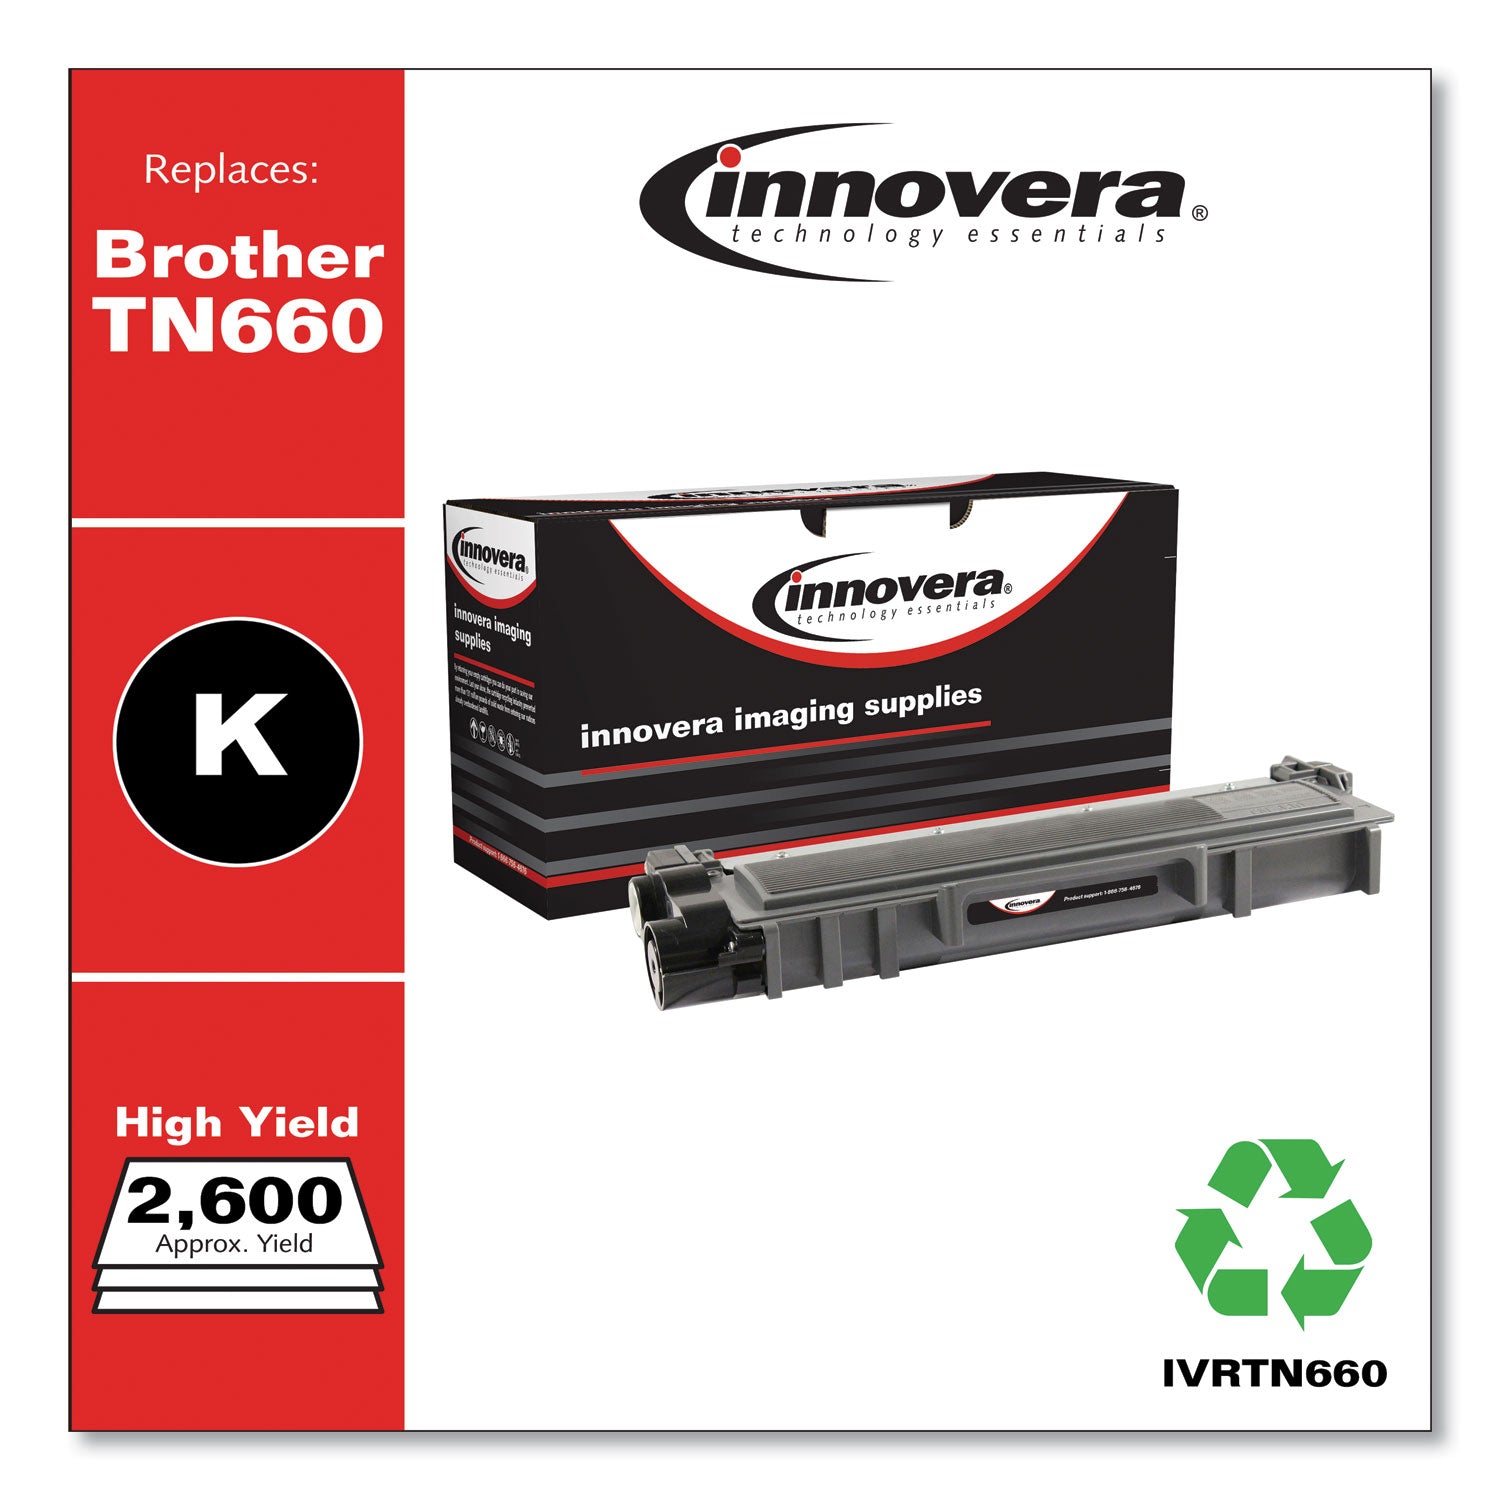 remanufactured-black-high-yield-toner-replacement-for-tn660-2600-page-yield_ivrtn660 - 2